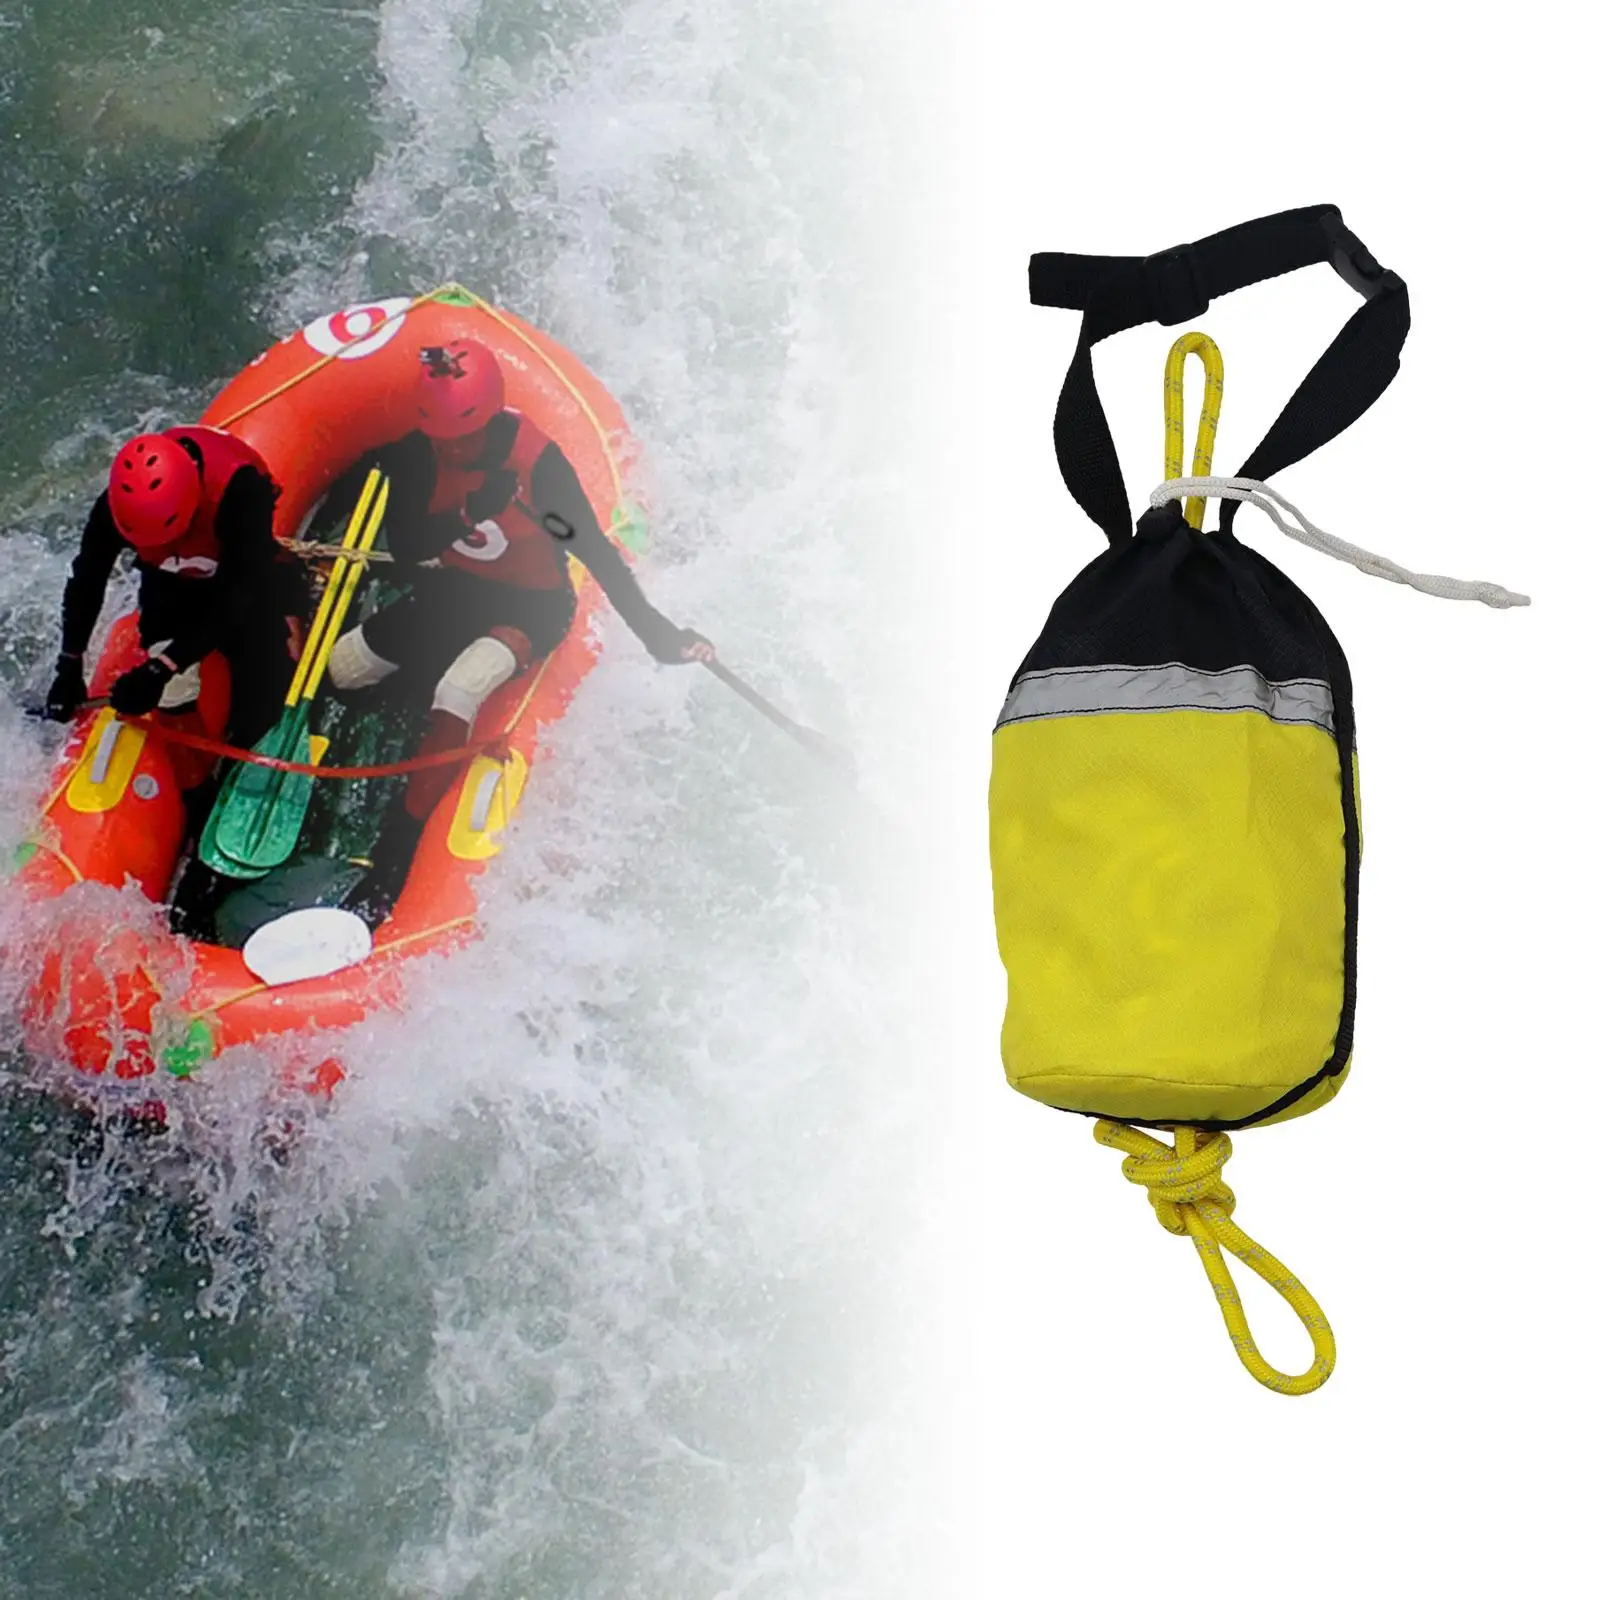 Throw Rope Bag Floating Rescue Ropes Throwing Line Throwable Safety Device for Ice Fishing Emergency Buoyant Dinghy Water Sports